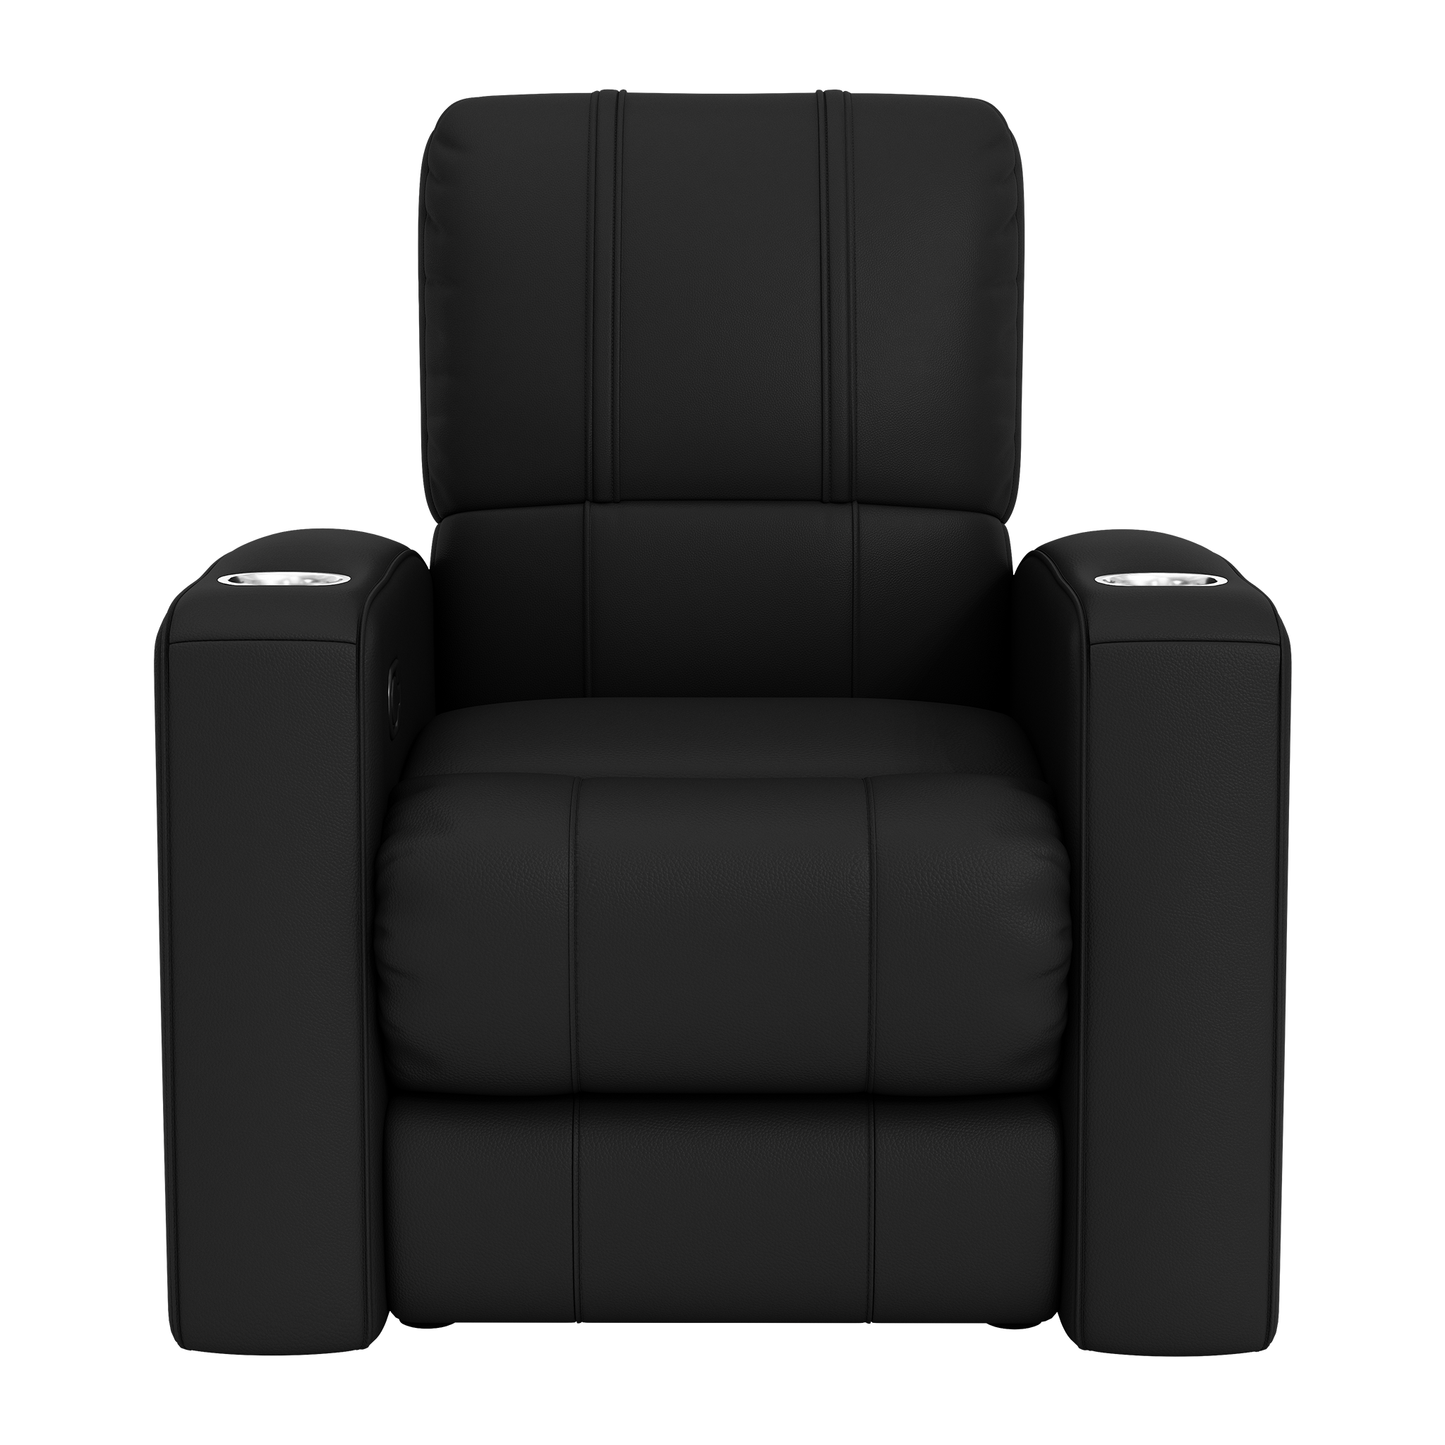 Relax Home Theater Recliner with Wichita State Primary Logo